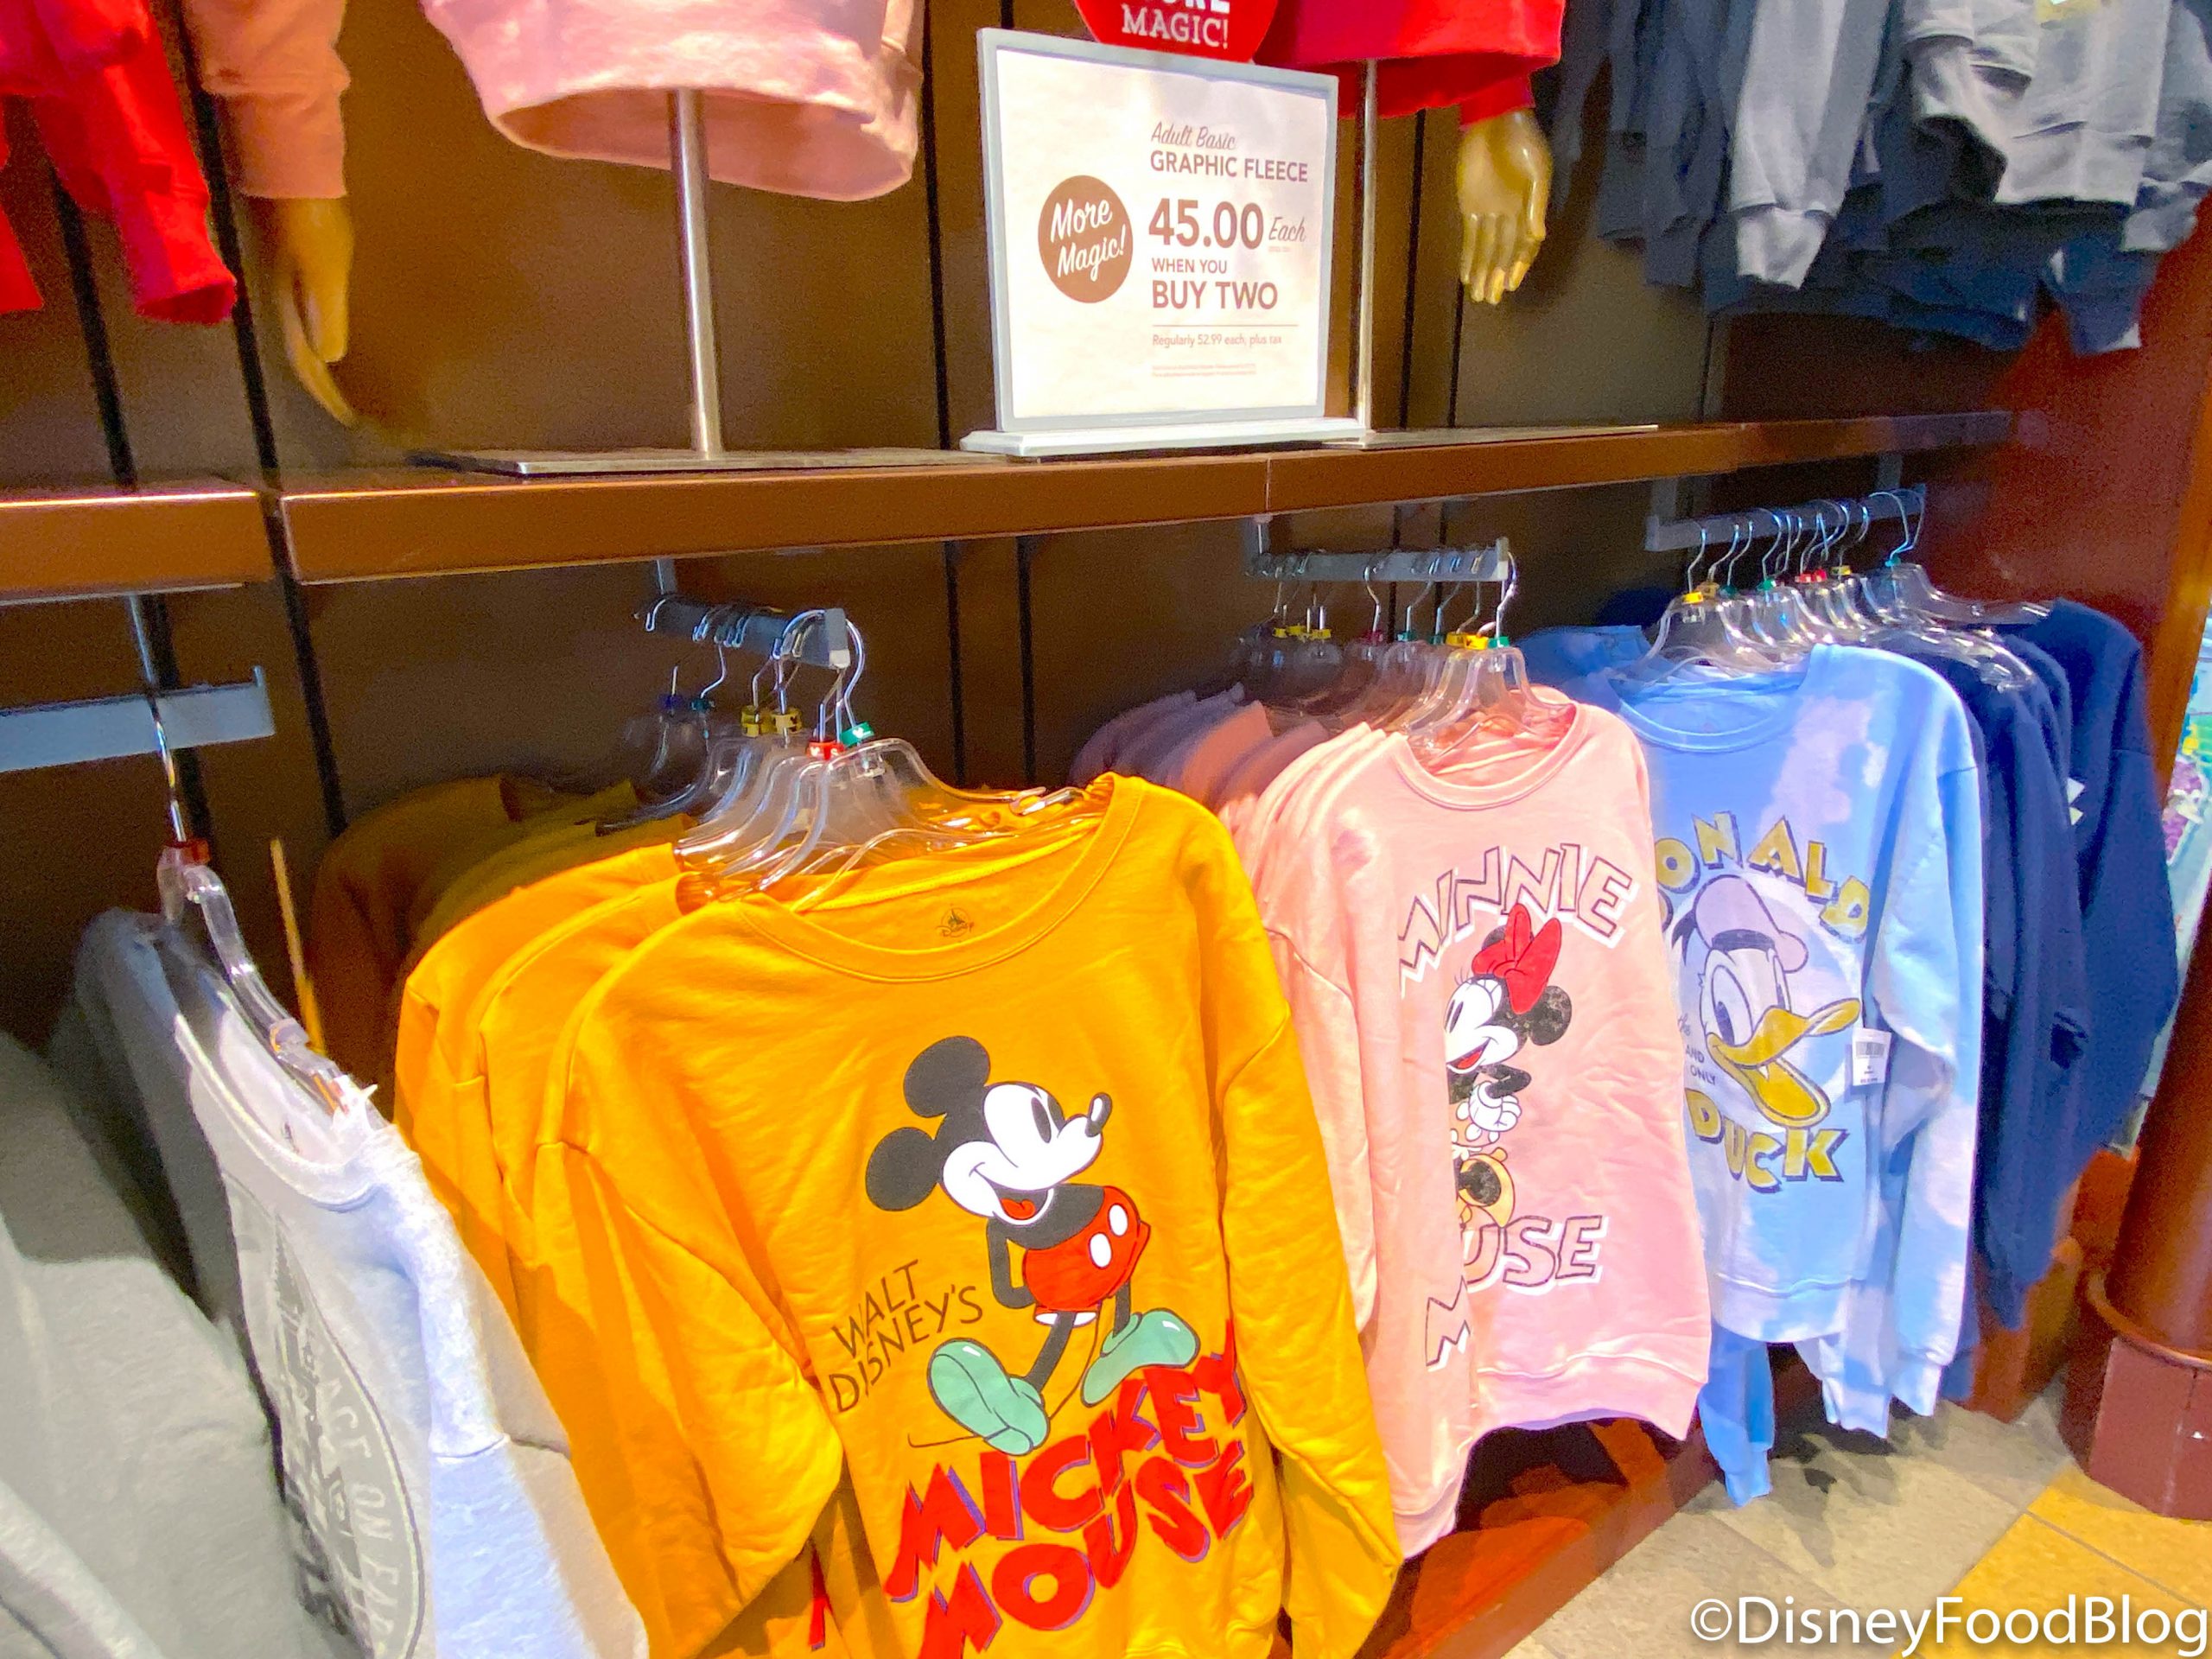 Disney-Inspired Clothing for Theme Park Visits